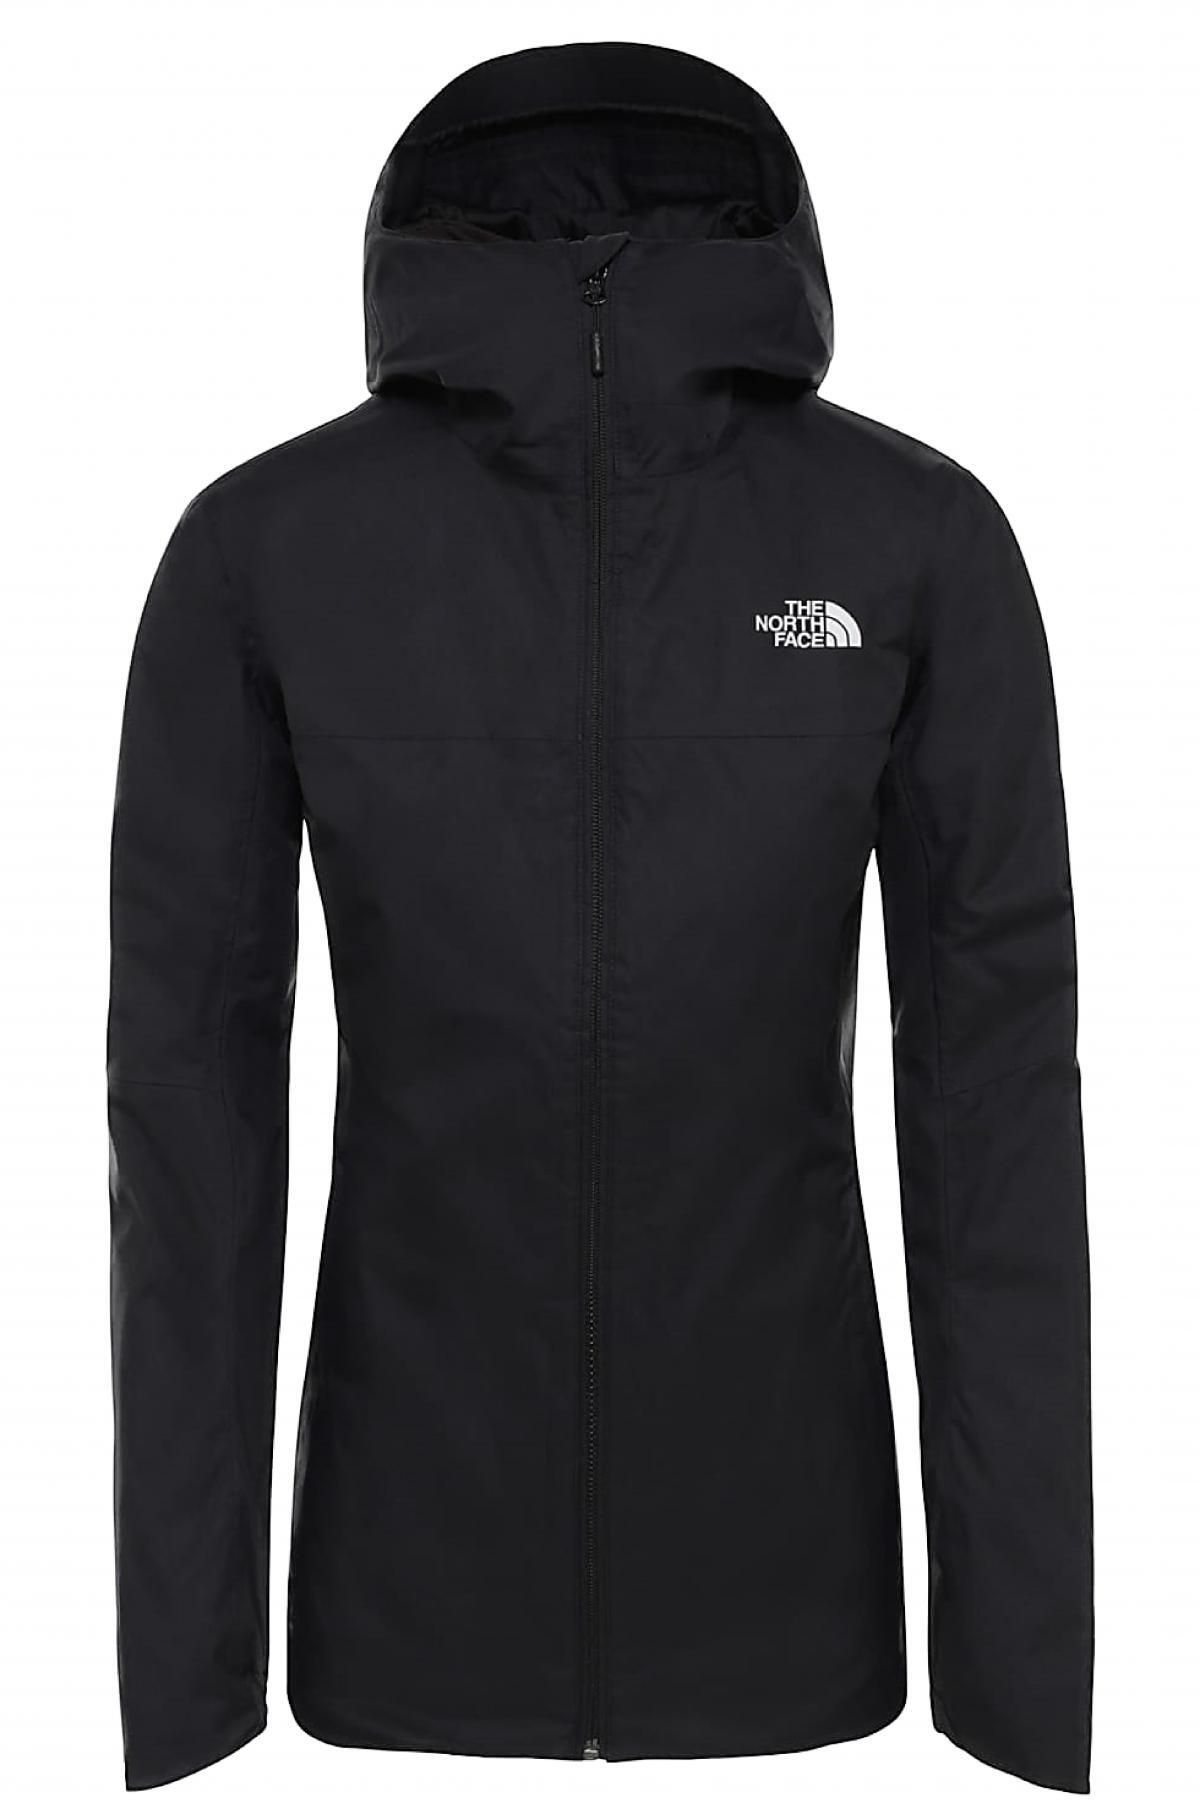 The North Face Nf0A3Y1J Quest İns Jacket Siyah Kadın Outdoor Mont